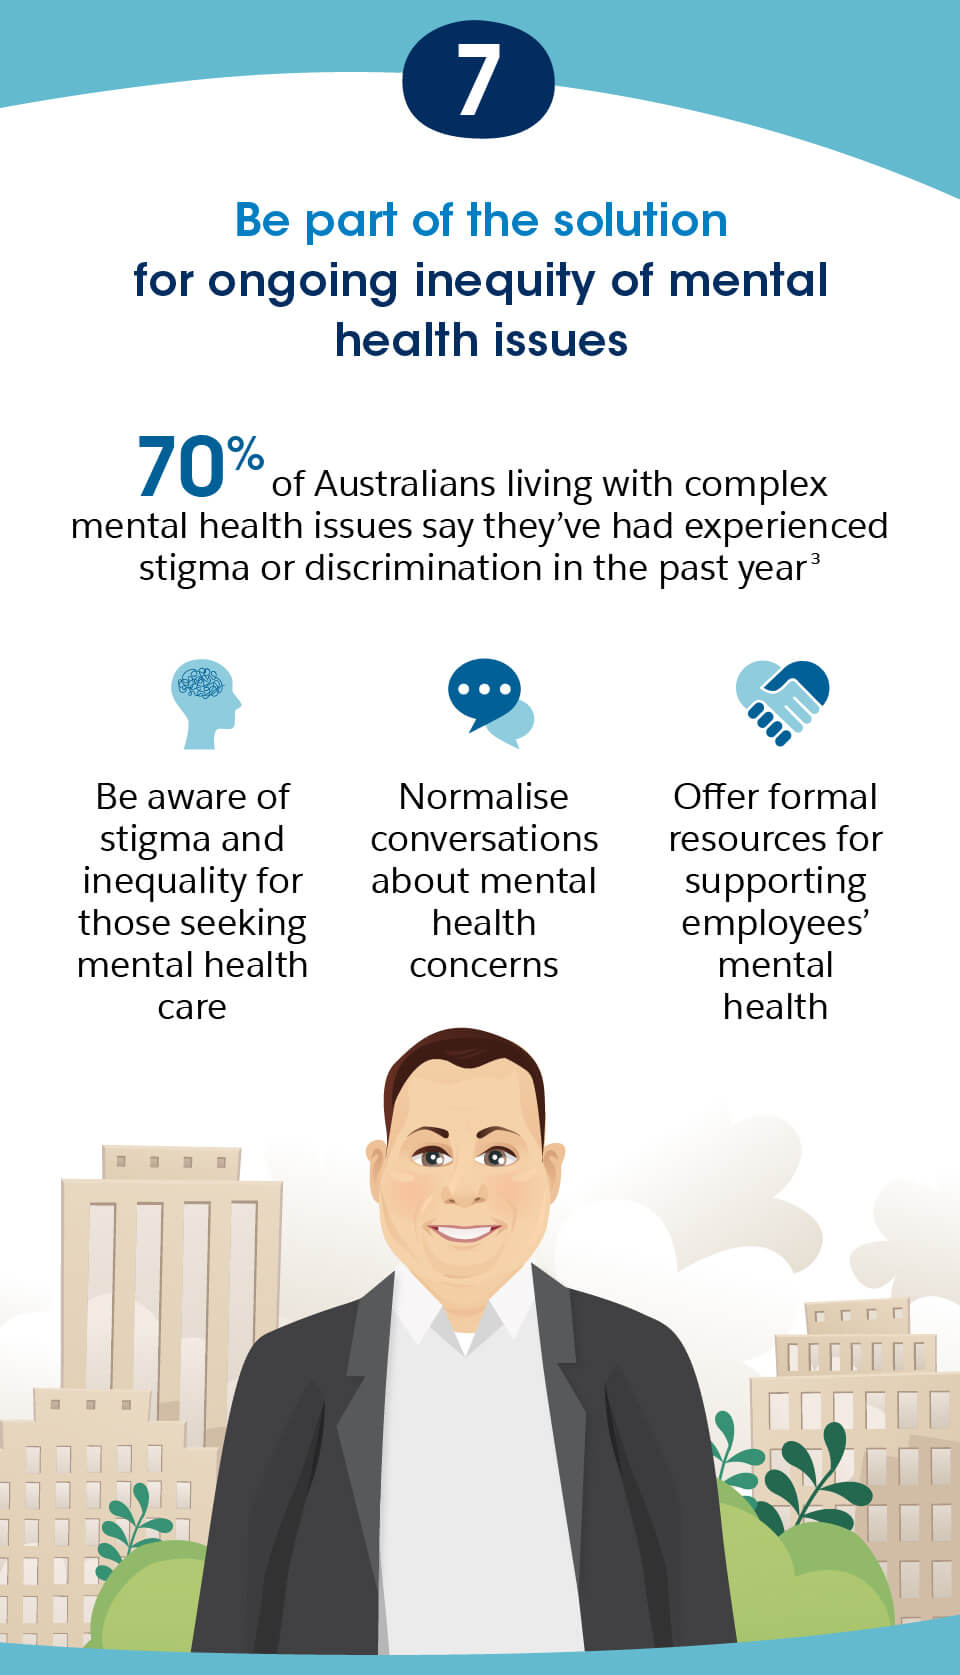 Be part of the solution for ongoing inequity of mental health issues